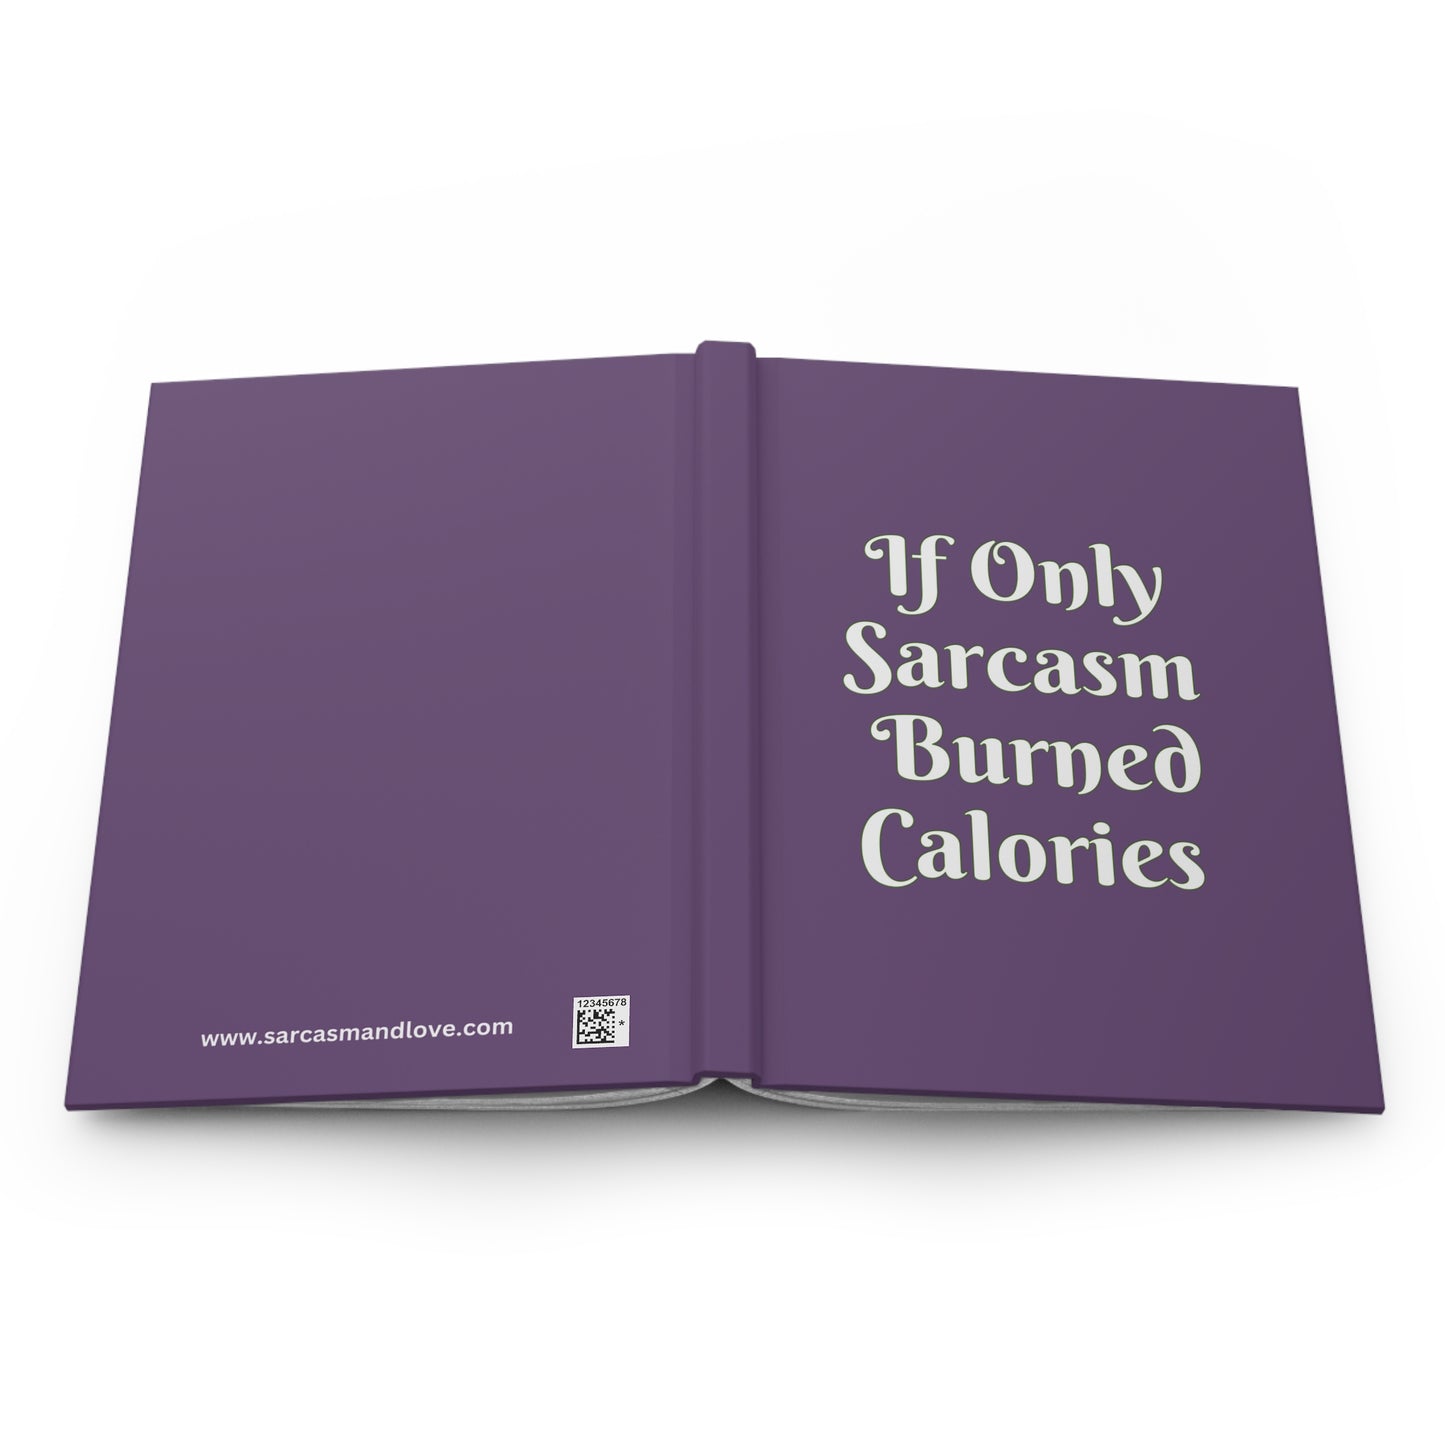 Sarcasm Burned Calories Journal: Hardcover Notebook for Daily Reflections, 5.75"x7.5", Mindfulness and Wellness, Self Care, Gift Idea